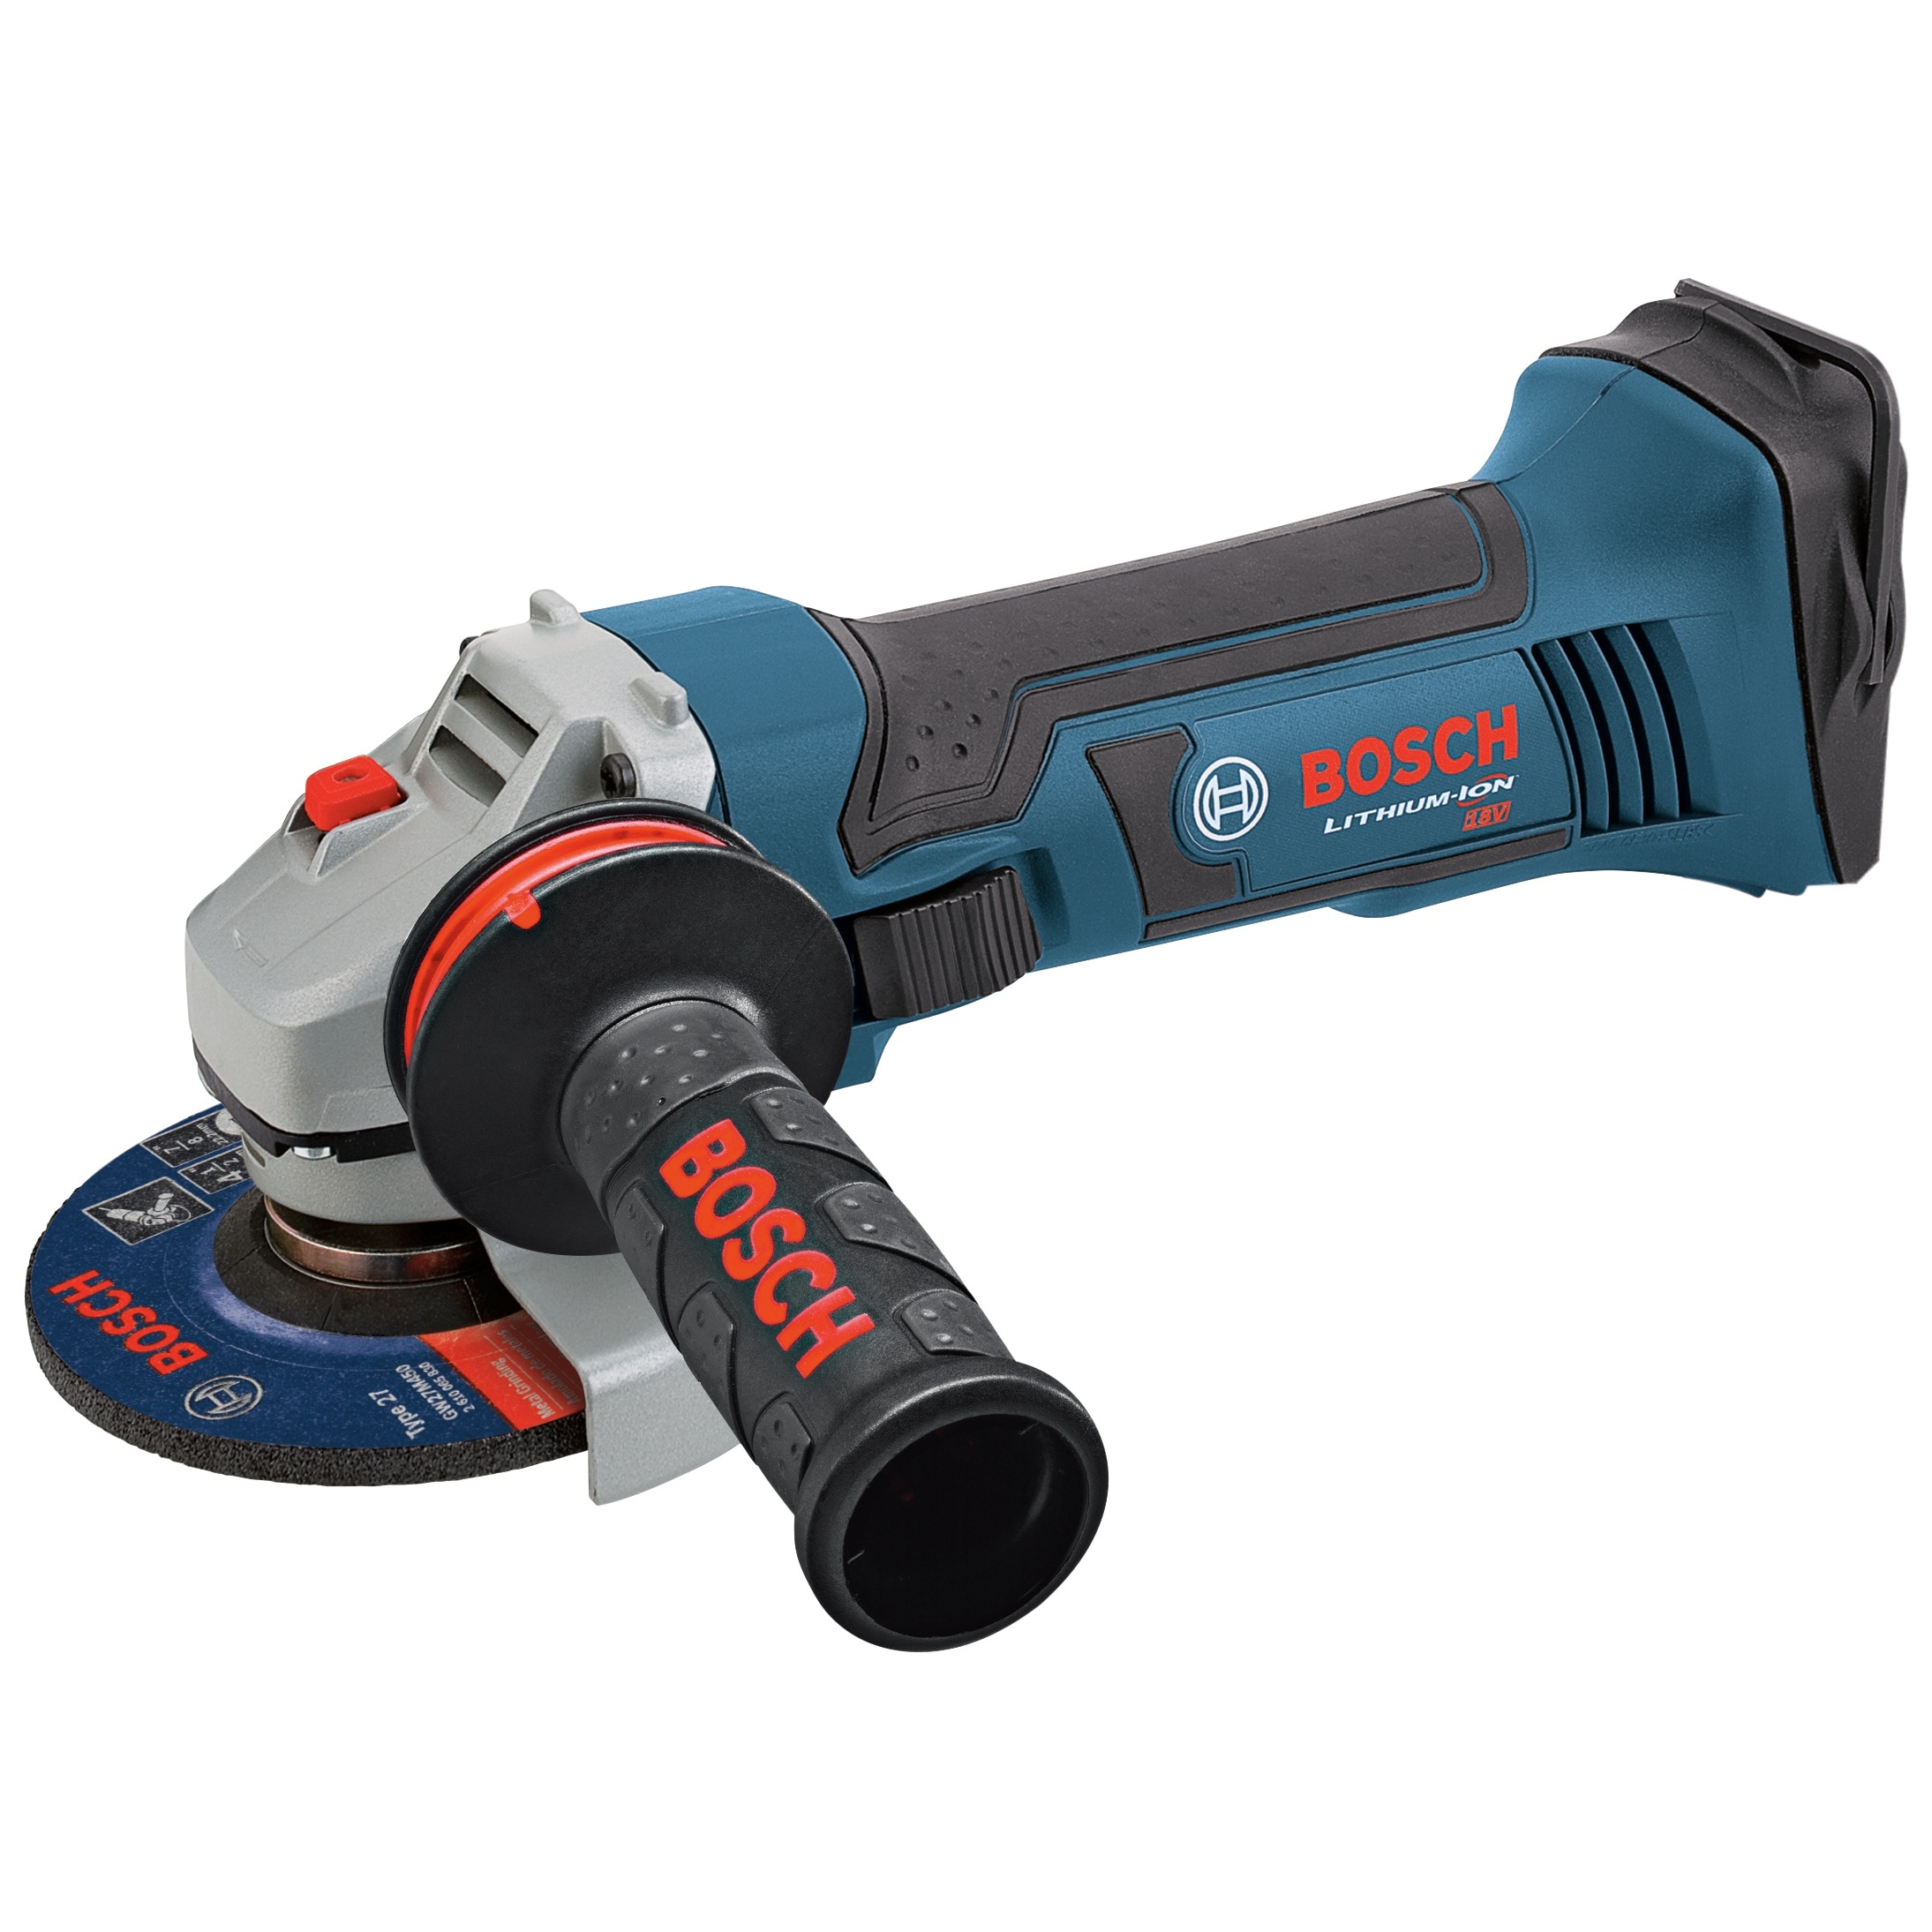 Bosch 4.5-in 18-volt 8 Amps Sliding Switch Cordless Angle Grinder (Tool  Only) at